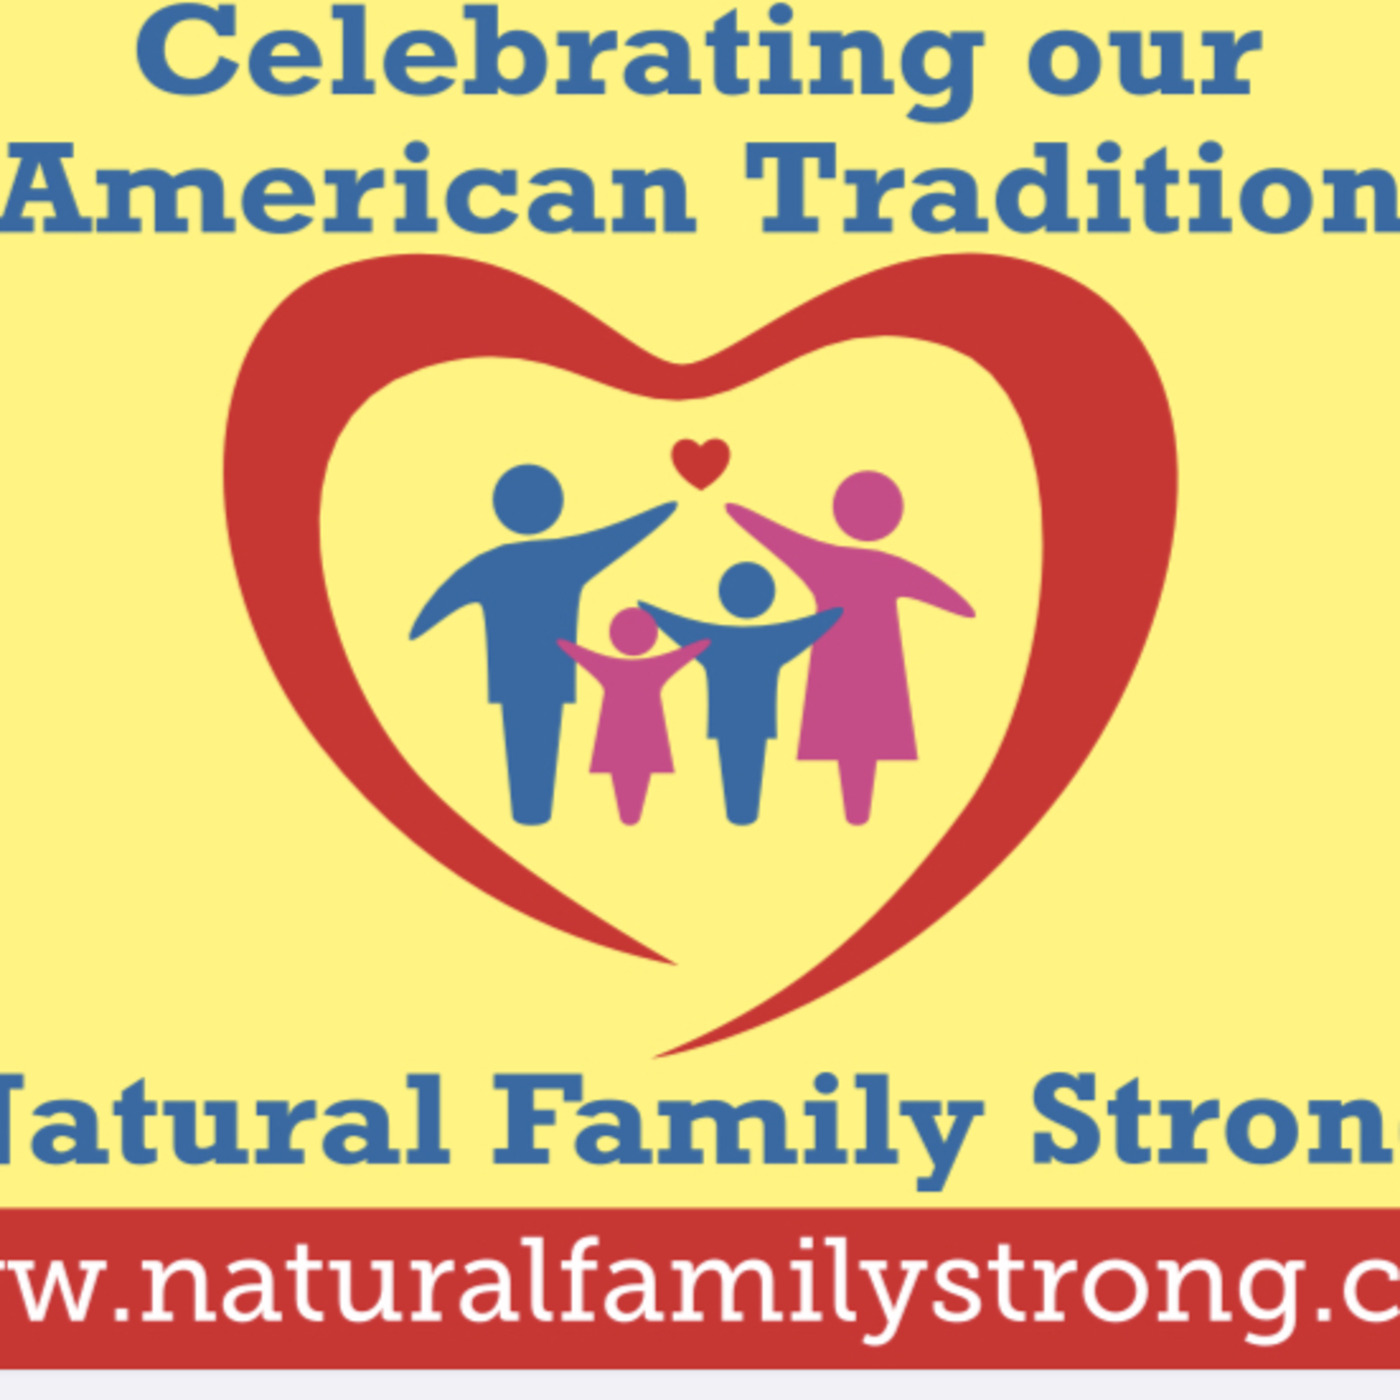 Episode 470: Camp Constitution Radio:  Natural Family Celebration-An Interview of James Harrison of the Natural Family Foundation